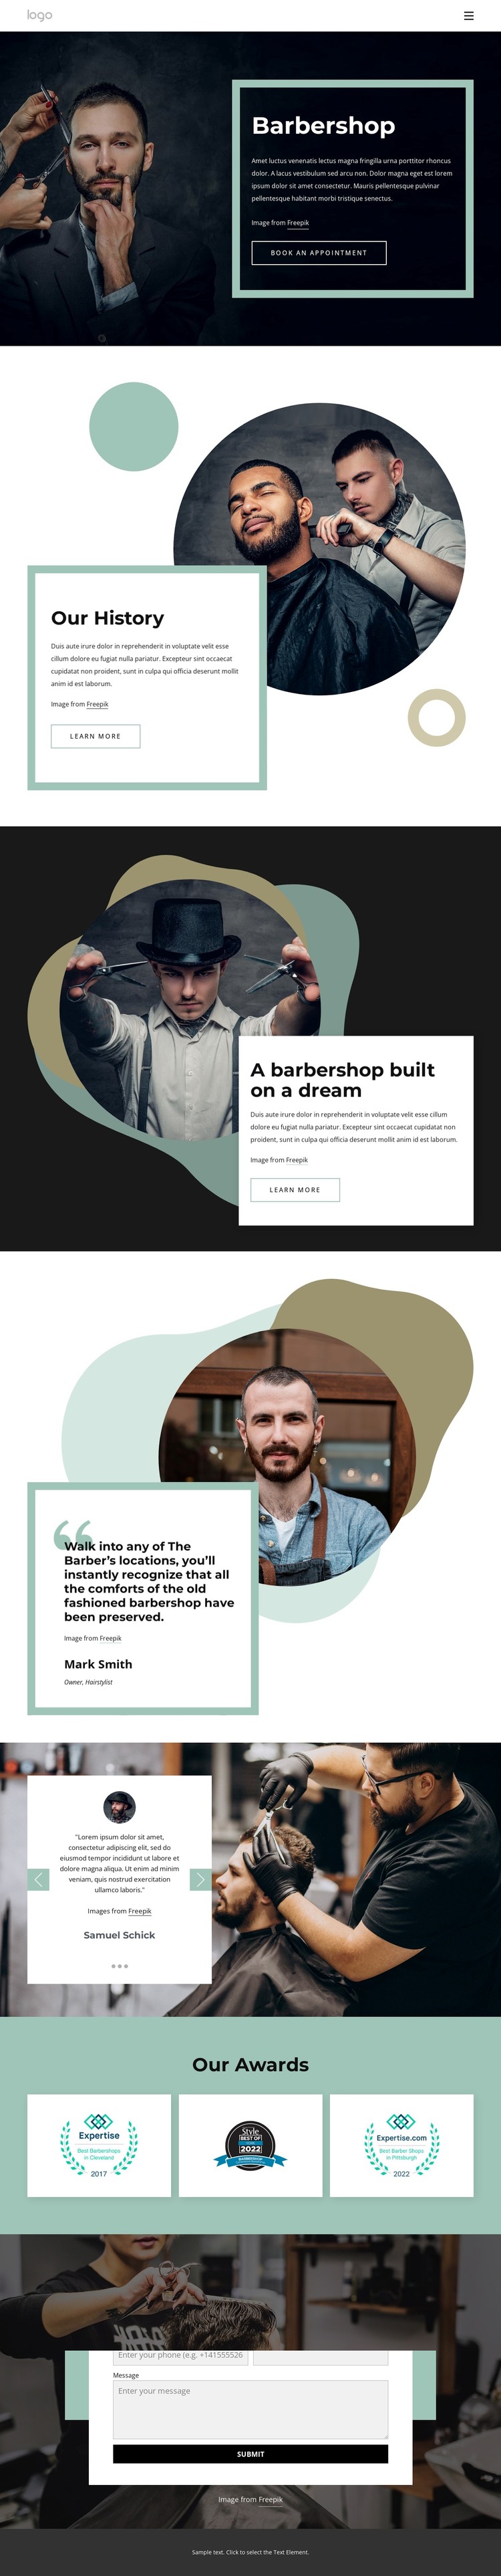 Barber shop through the ages WordPress Theme